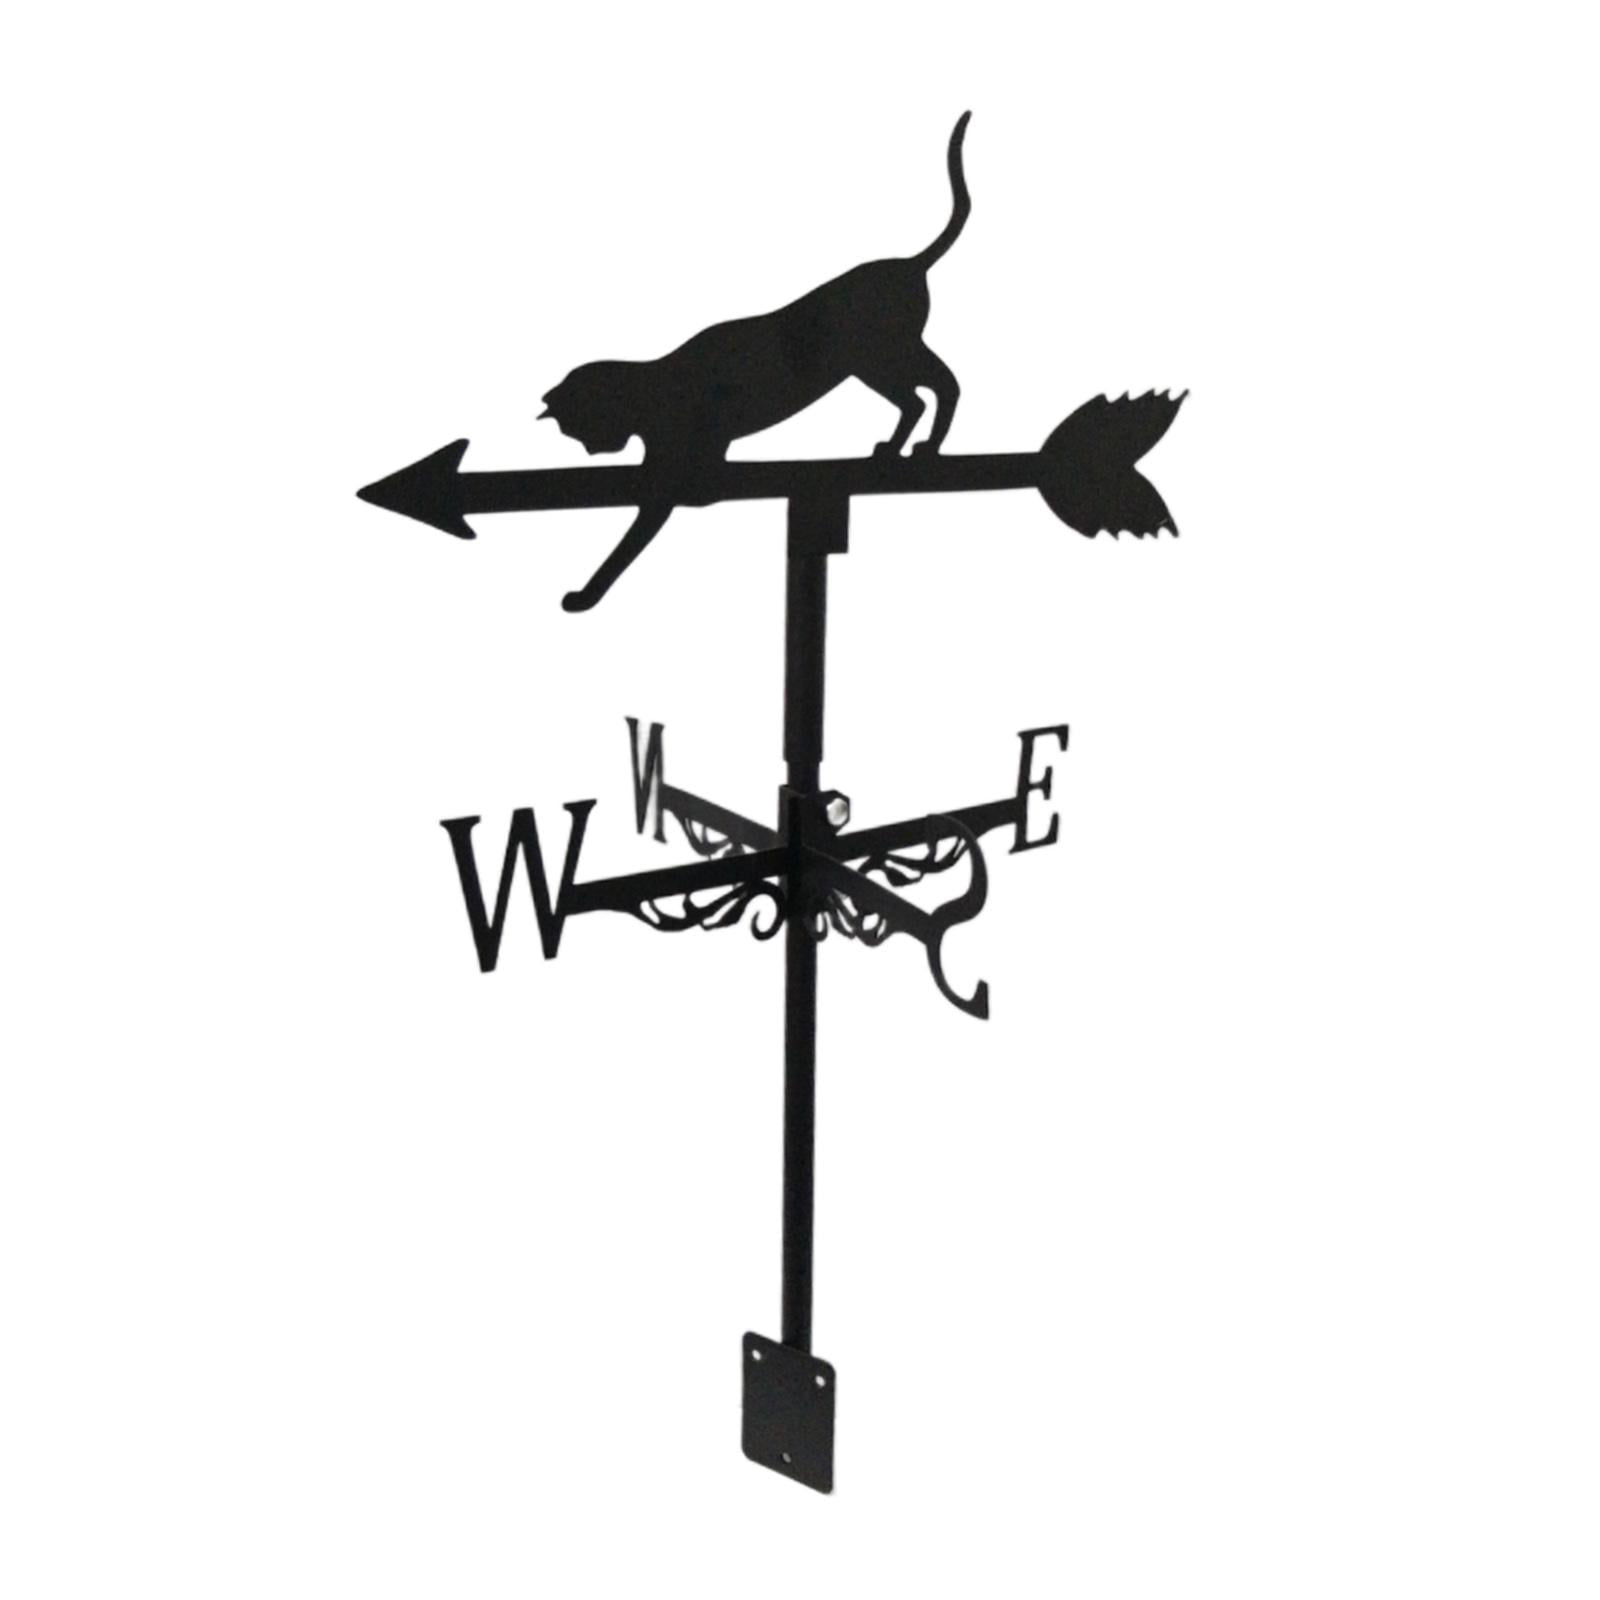 Weathervane for cupola Cats Metal Weathervane for roofs Weathervane Outdoor Farm House Decor Weathervane Copper Weathervane Garden